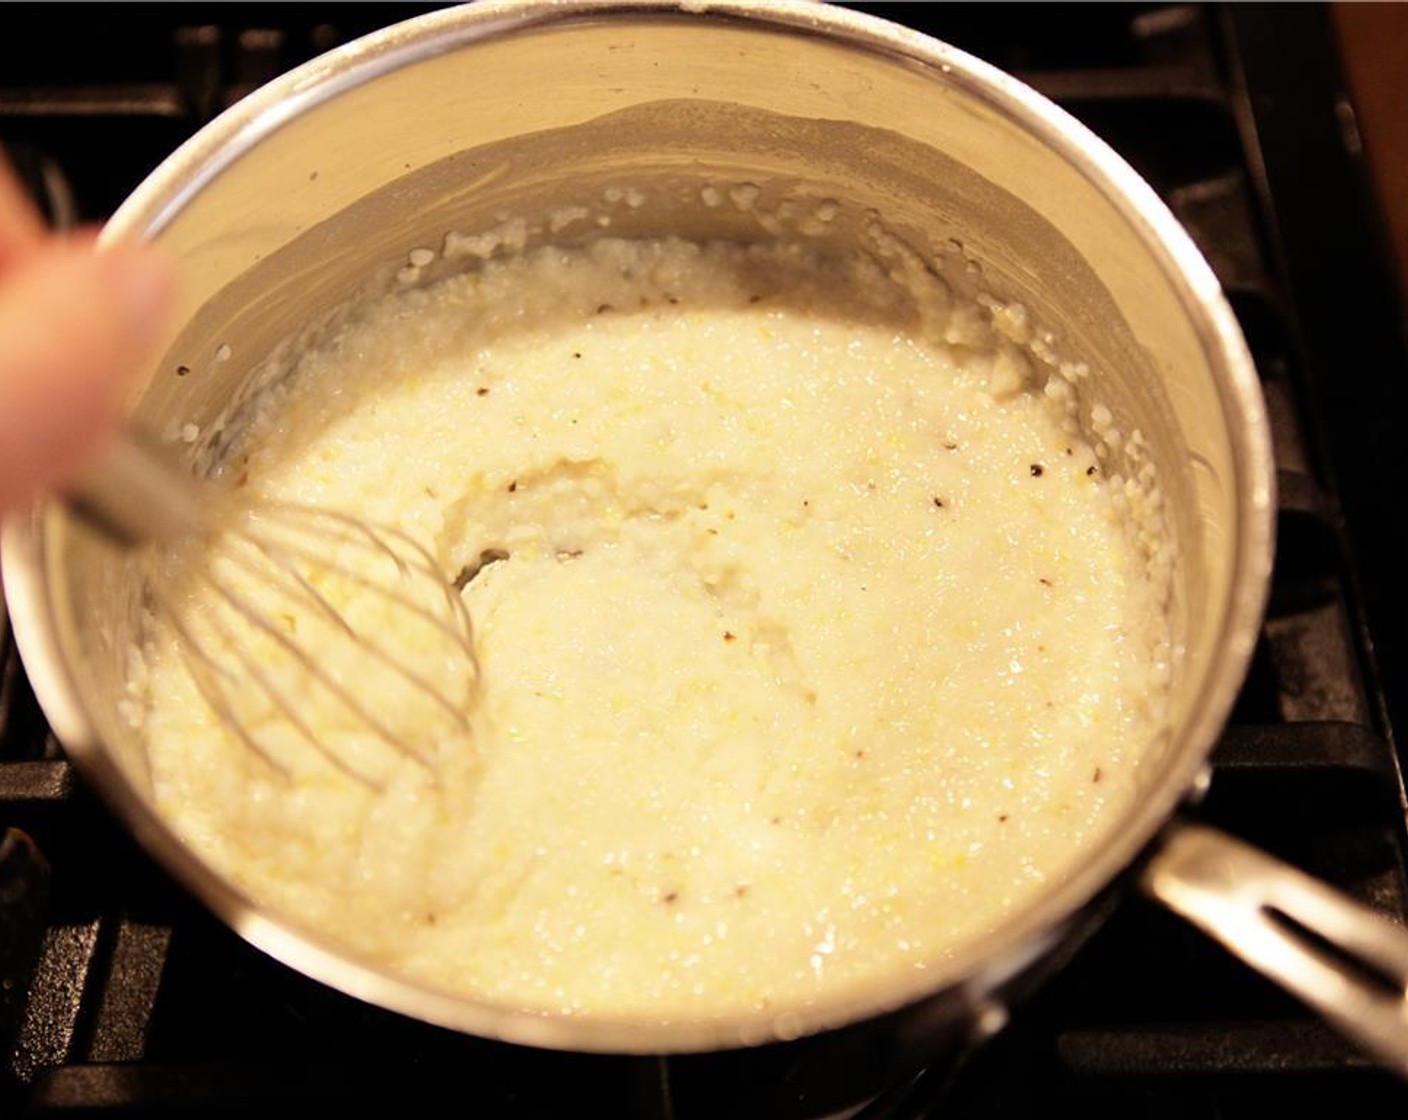 step 3 Continue stirring grits along the bottom every 5 minutes or so with a whisk and/or flat-edged wooden spoon to avoid scorching the pot. Once grits have cooked fully, turn off heat, cover the pot and let rest for 15-20 min